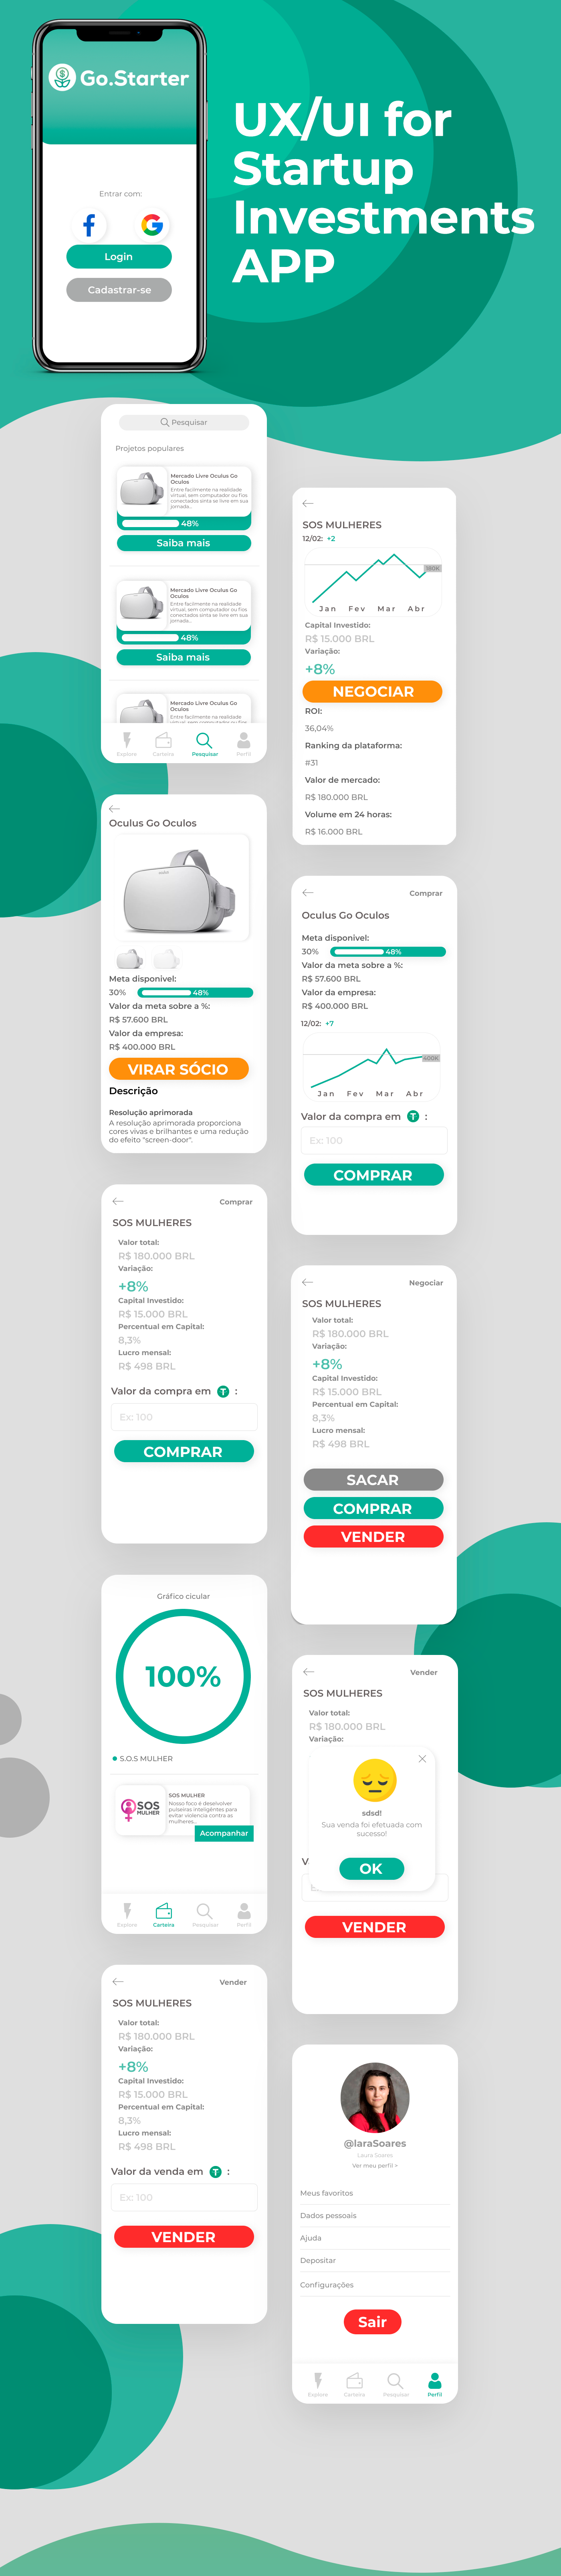 app investimento Investments Startup UI ux